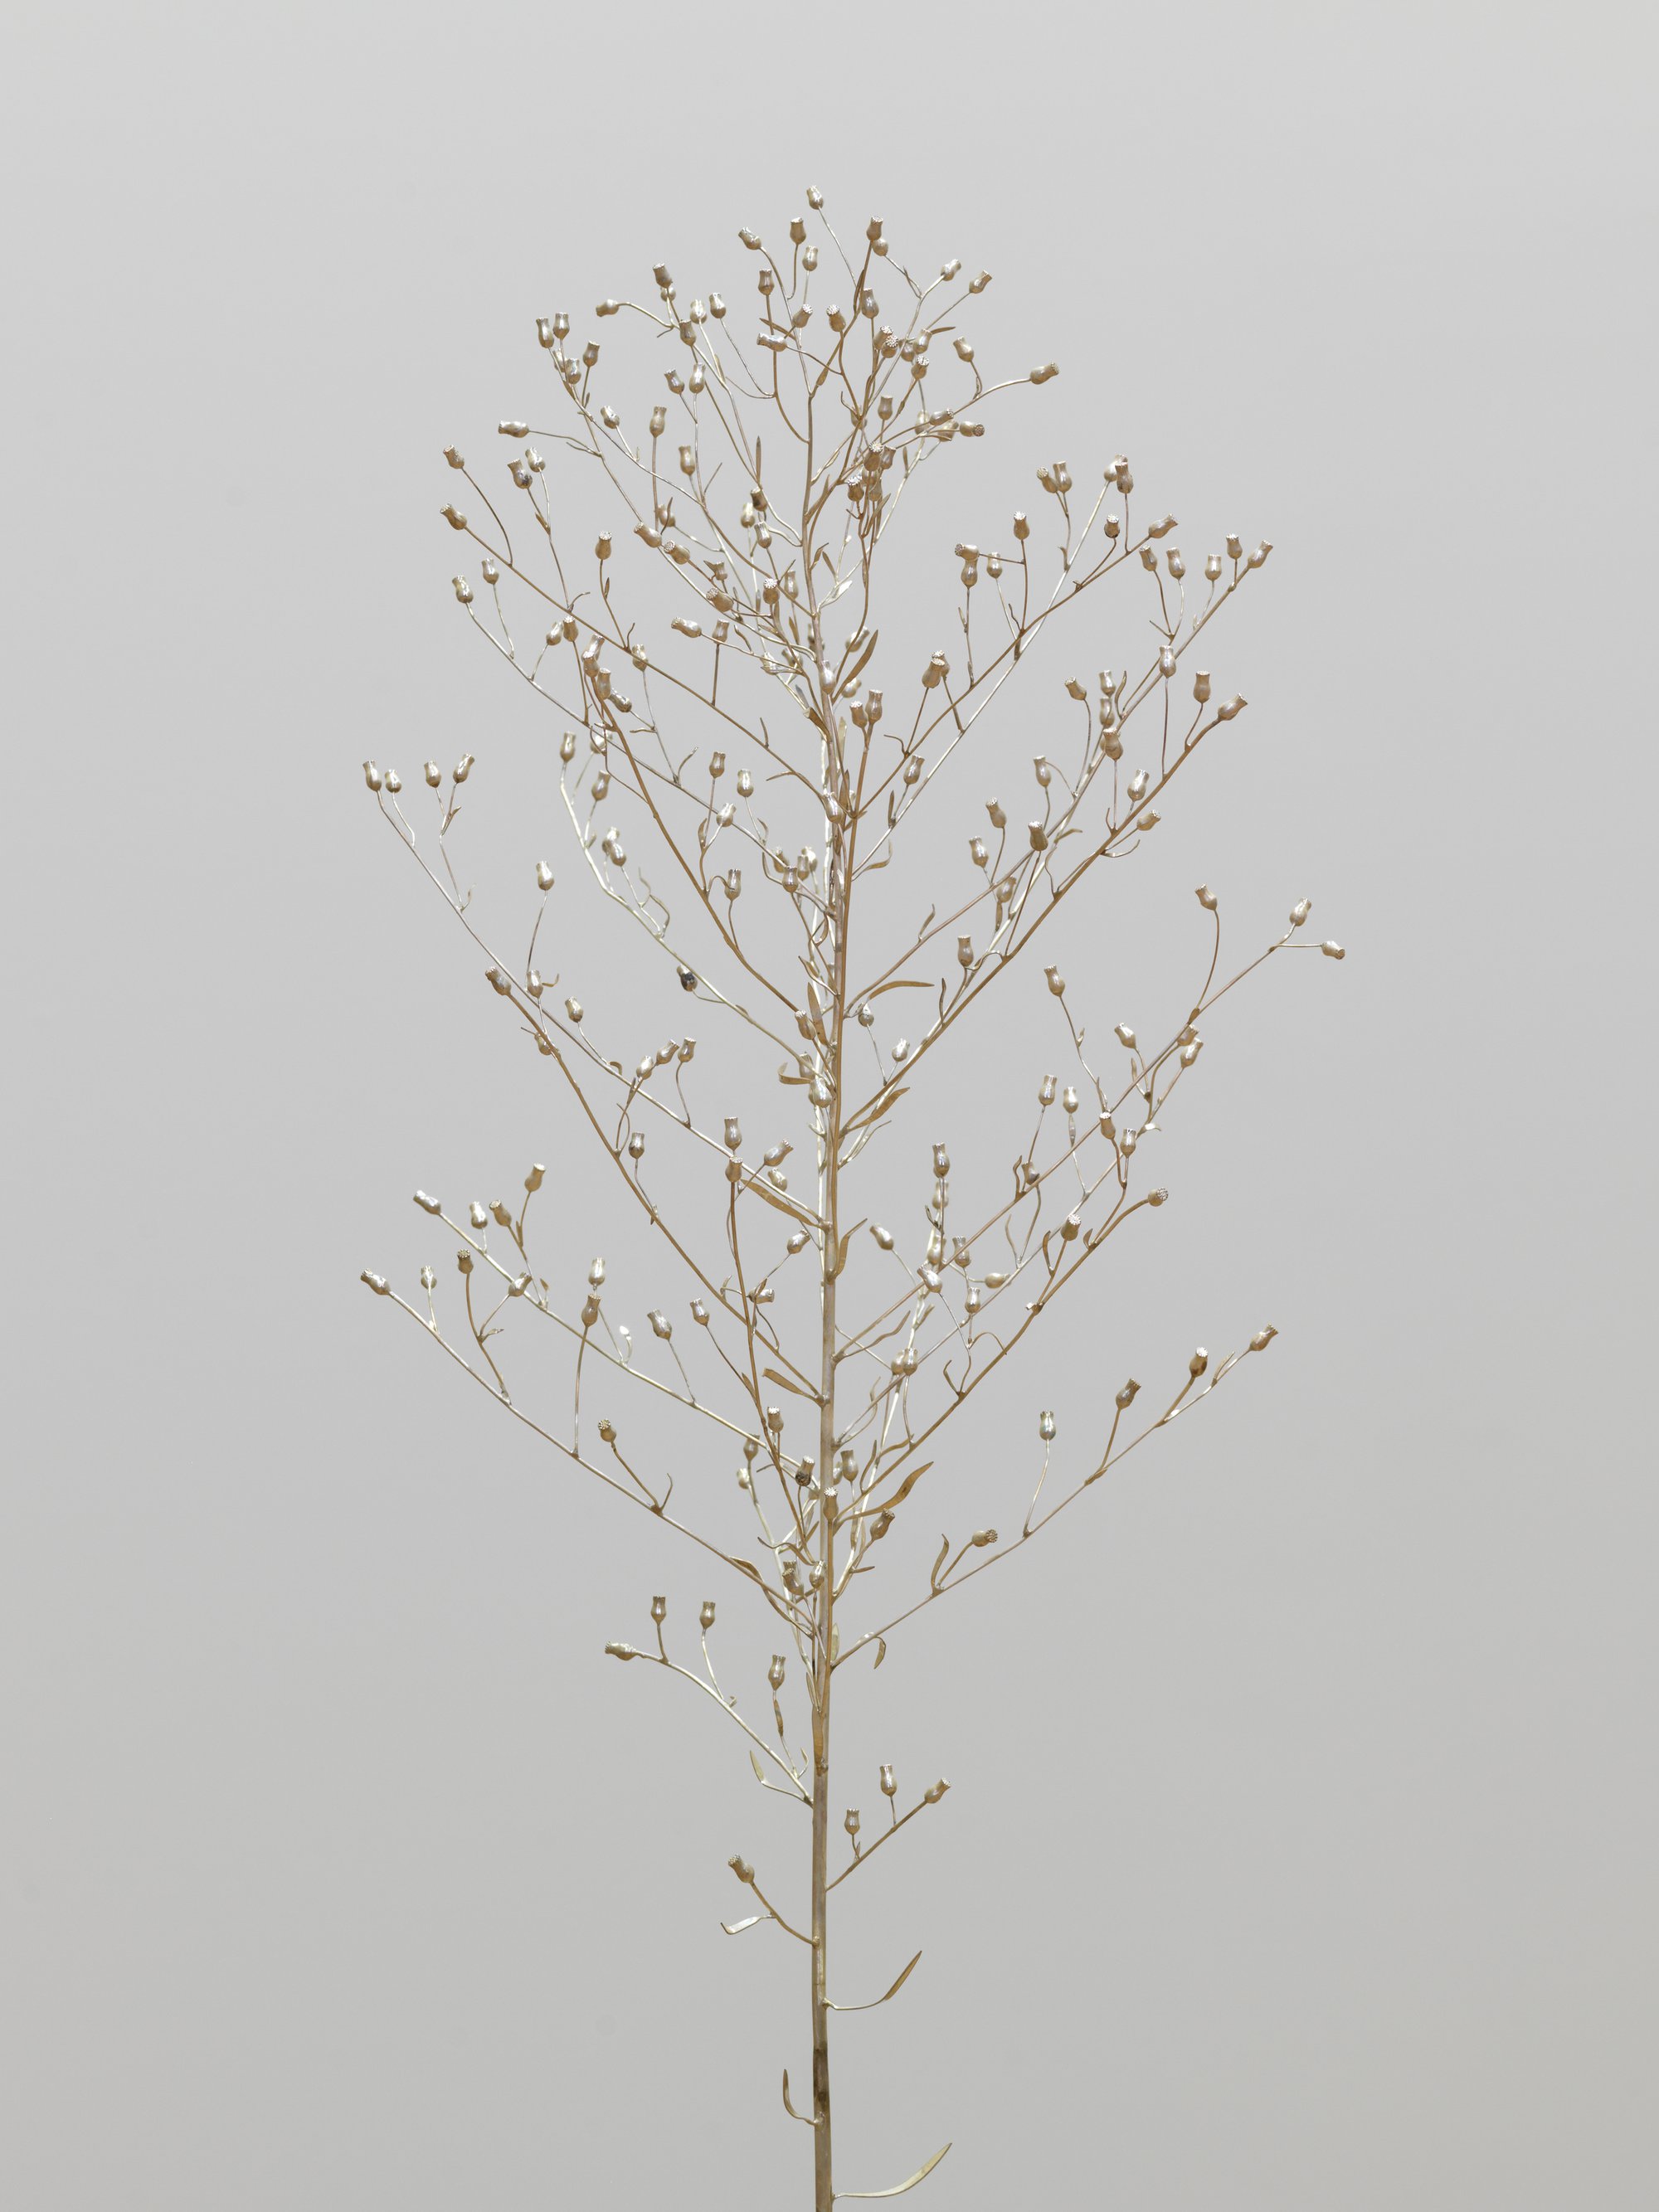 Christodoulos Panayiotou, Horseweed, detail, sterling silver sculpture, approx. 130 x 25 x 25 cm, 2021